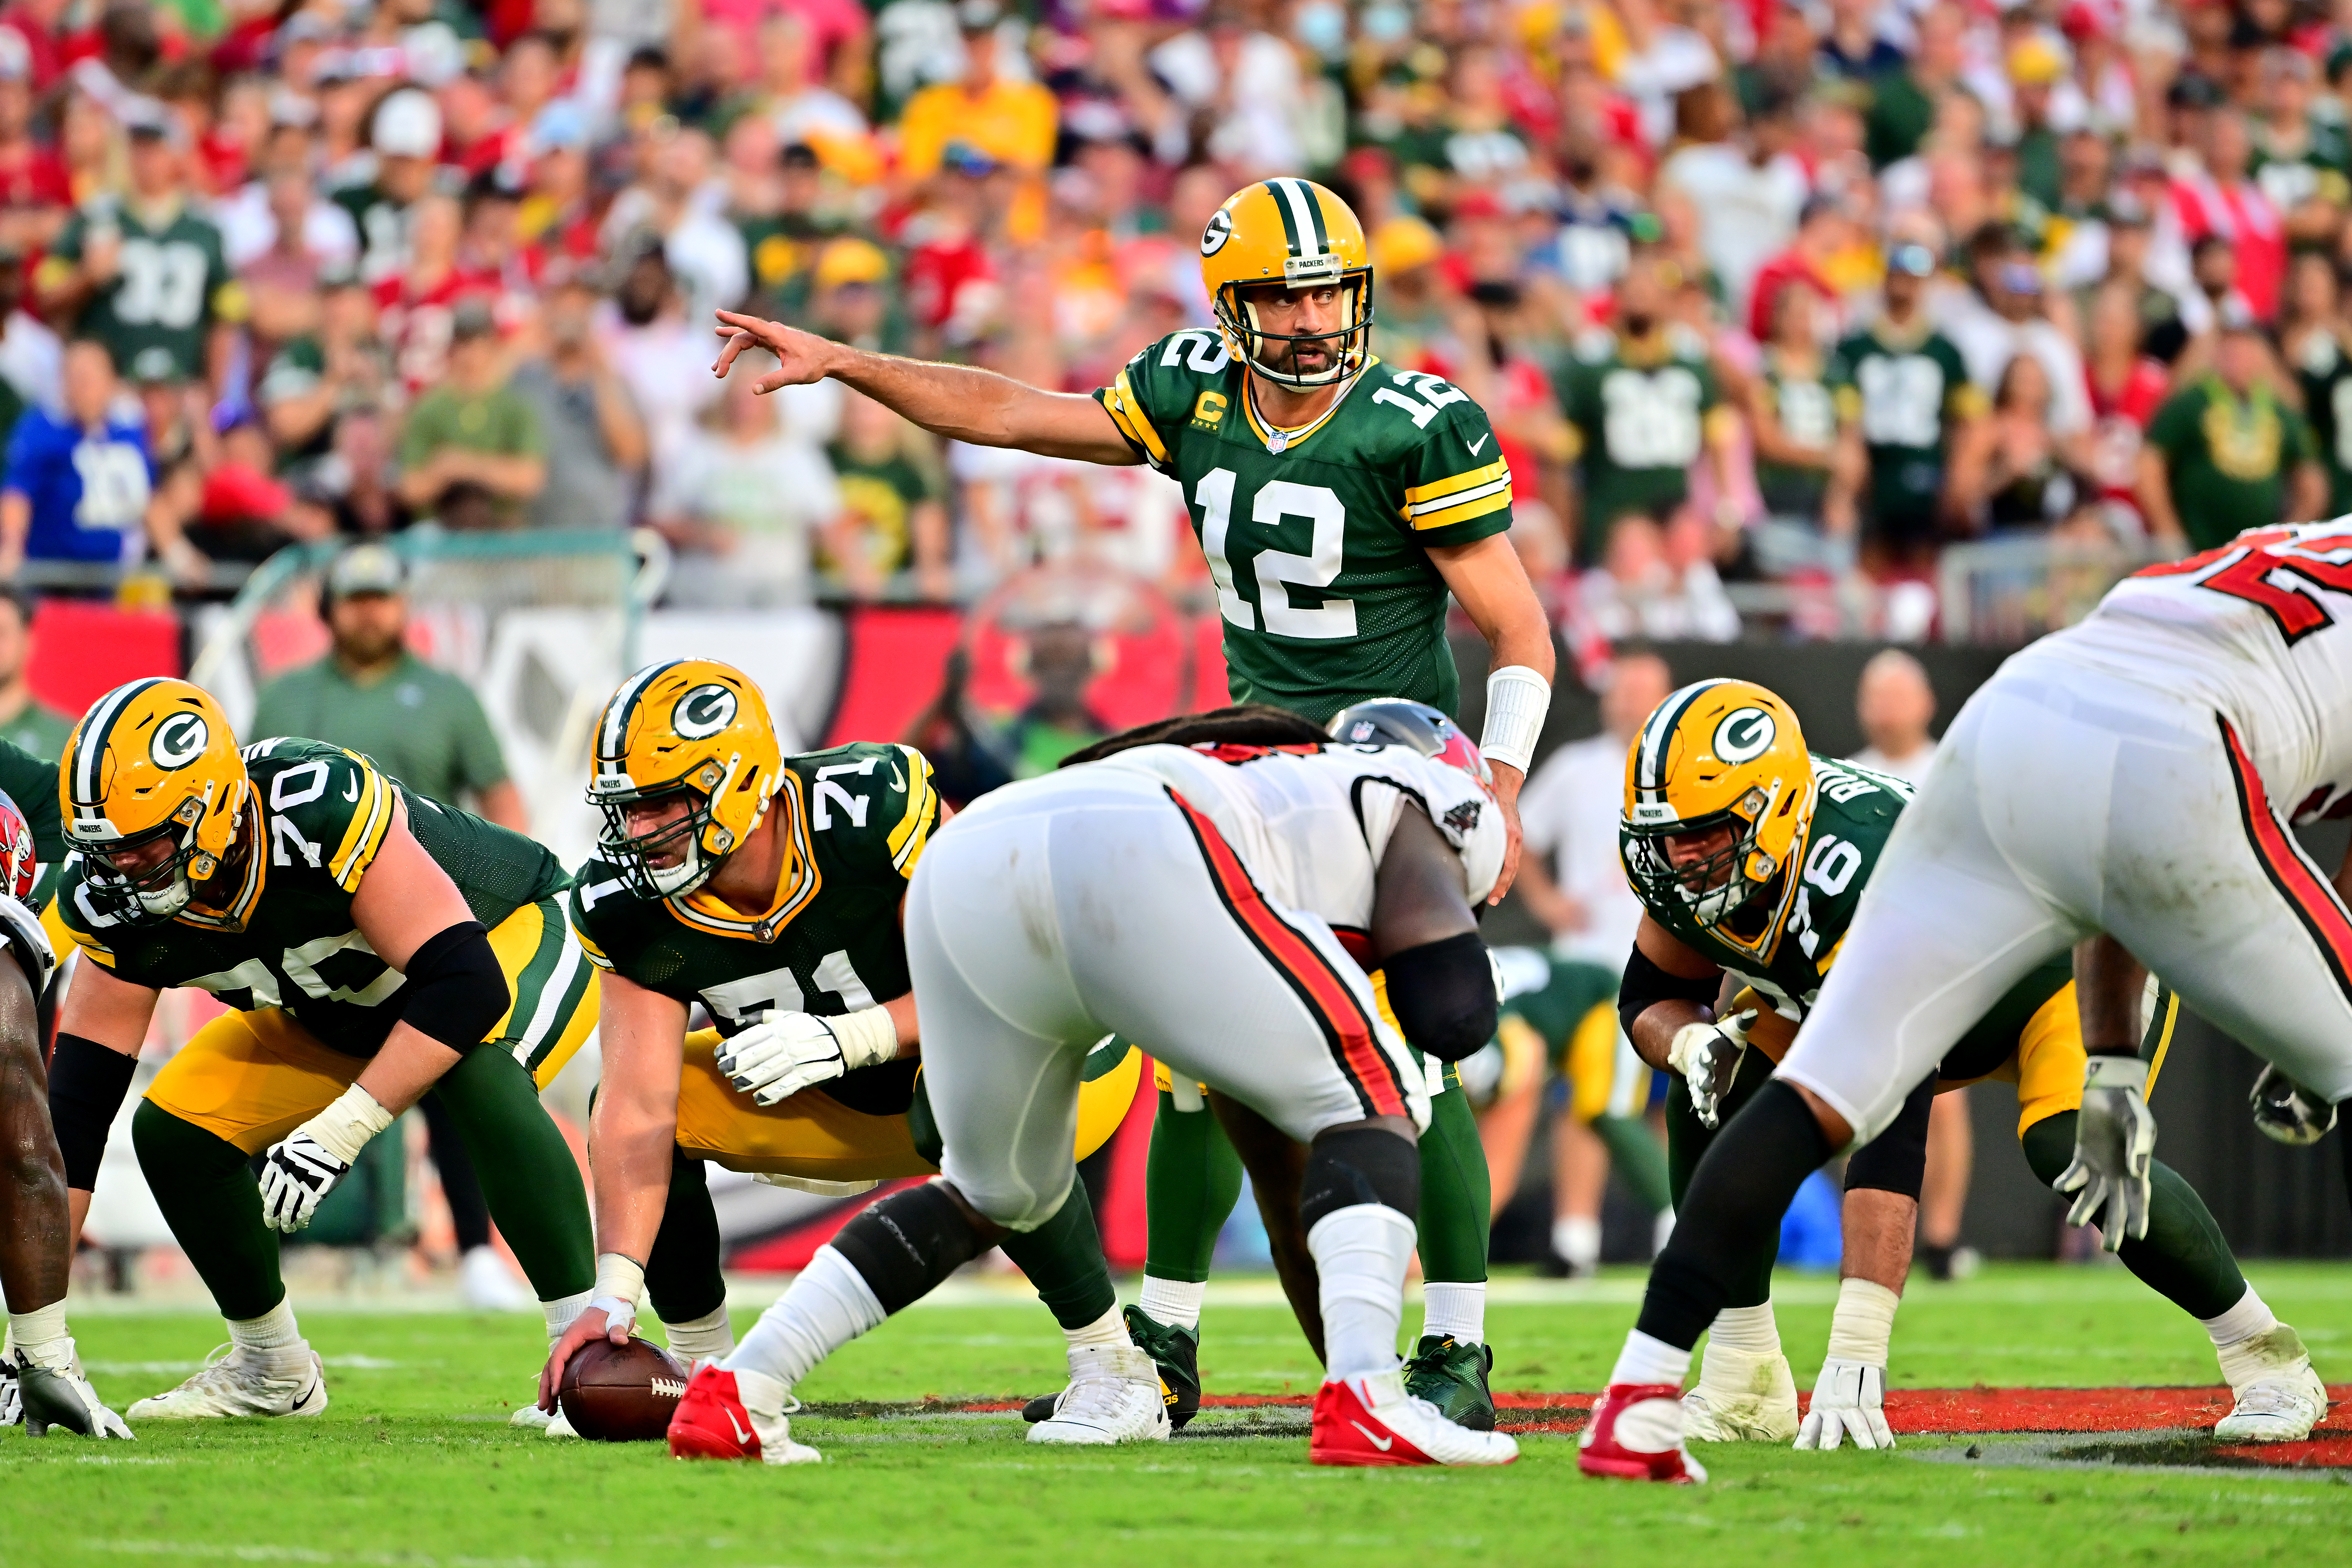 Aaron Rodgers #12 of the Green Bay Packers calls a play against the Tampa Bay Buccaneers during the fourth quarter in the game at Raymond James Stadium on September 25, 2022 in Tampa, Florida.